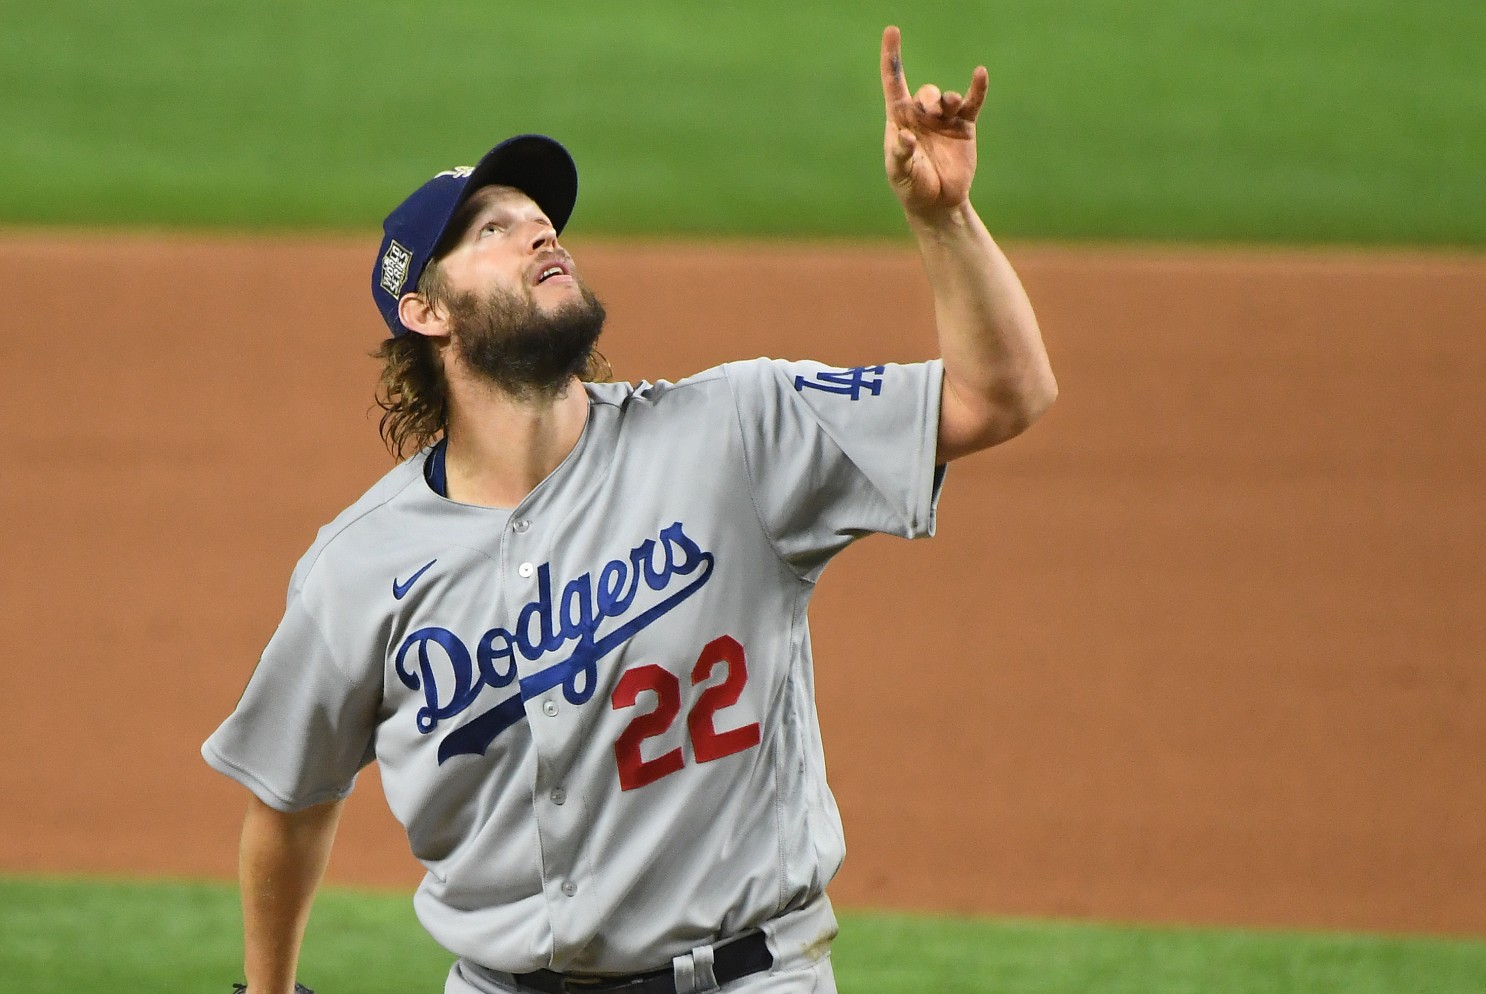 Kershaw and the Dodgers favored in 2021